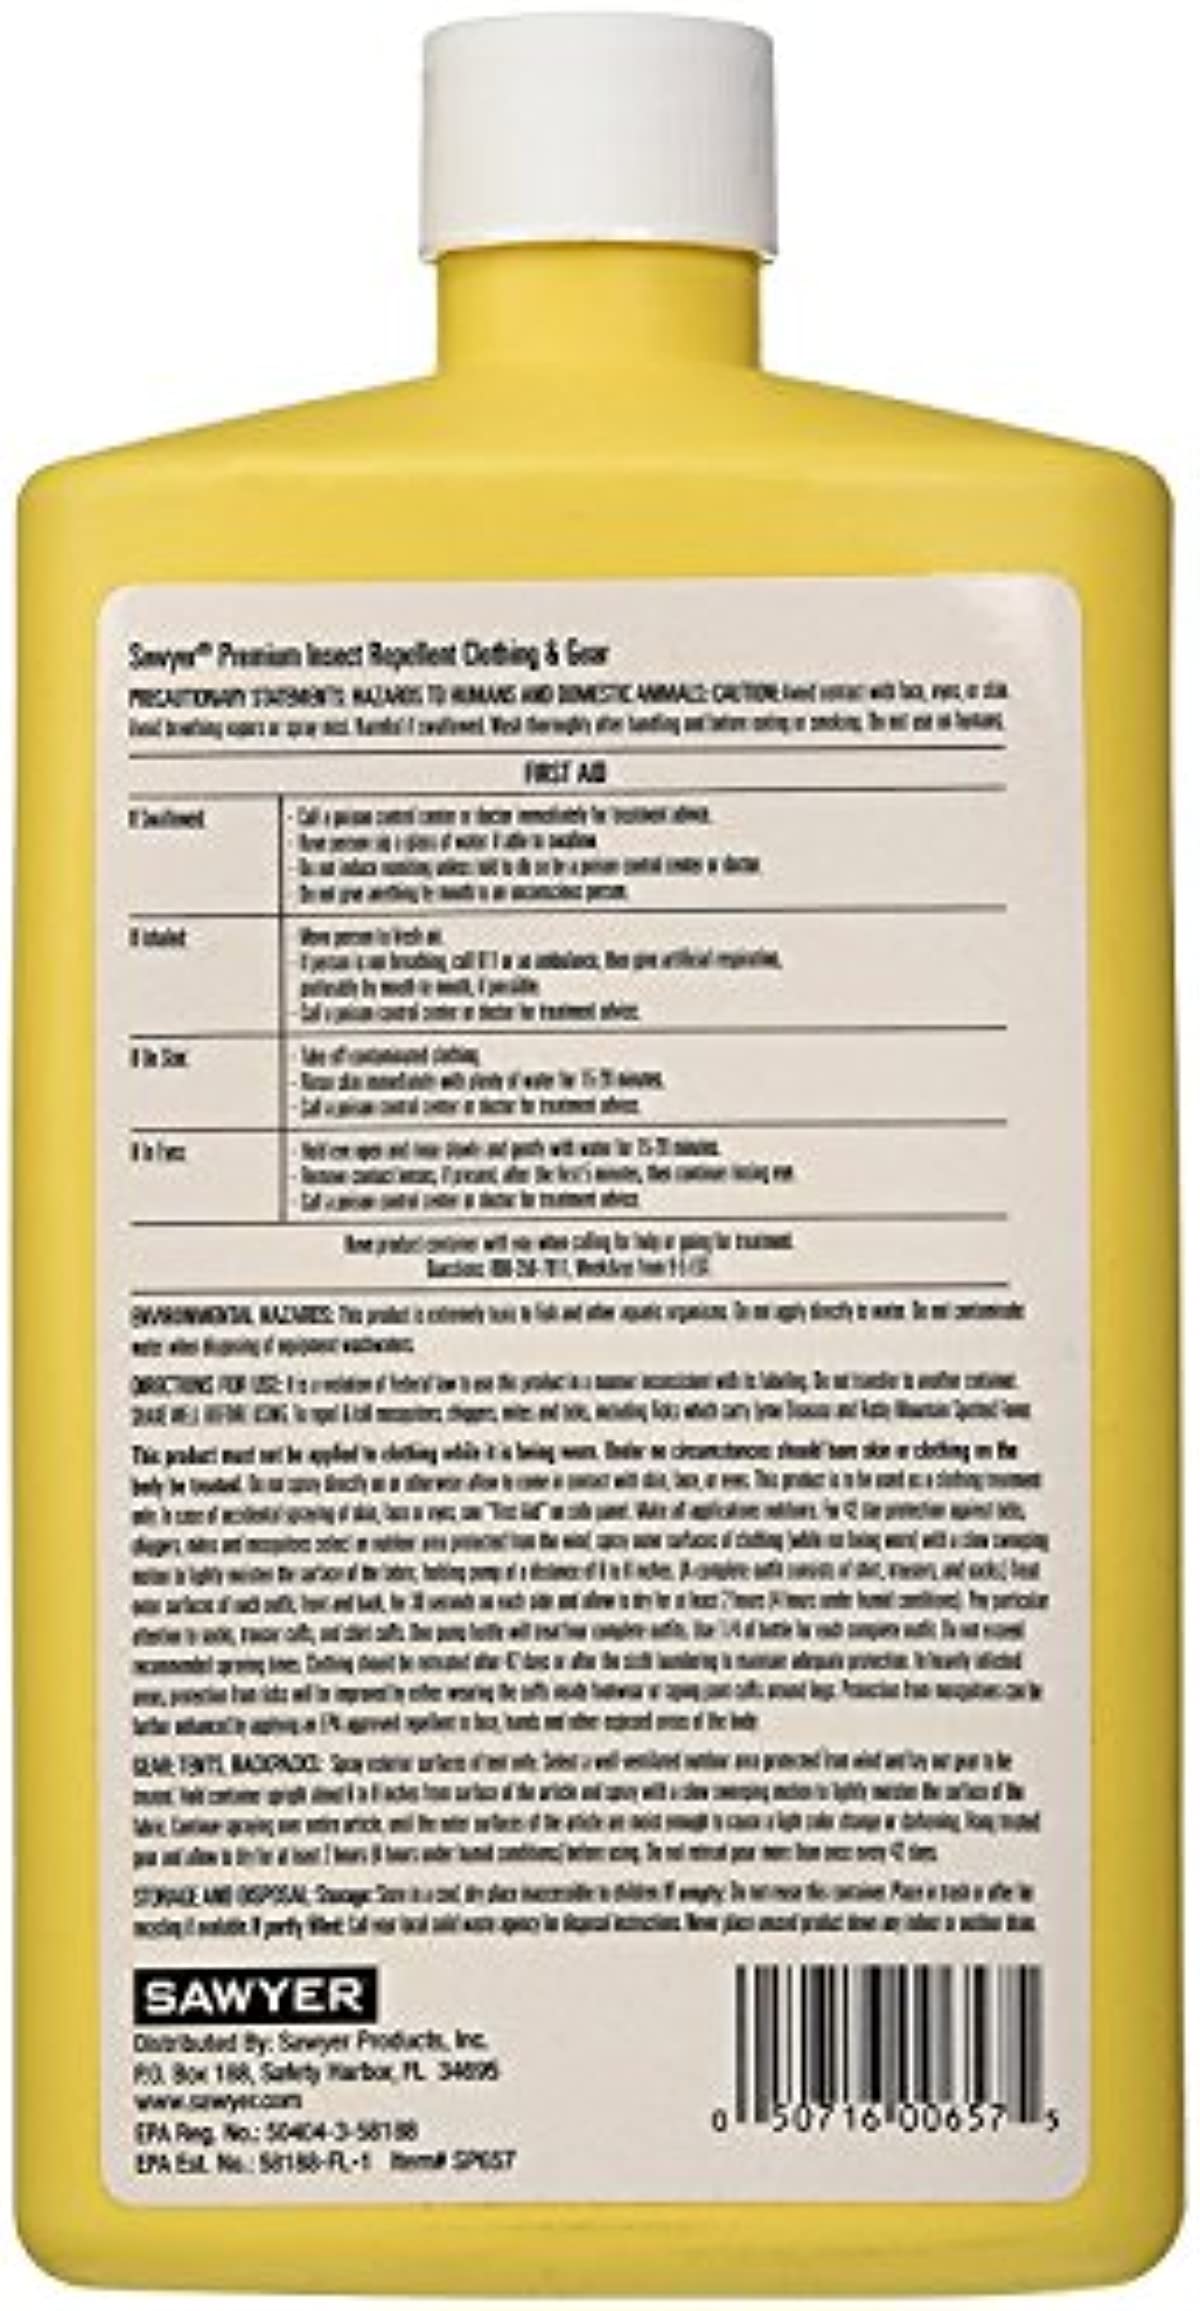 Sawyer Products Premium Permethrin Clothing Insect Repellent (24-Oz Trigger Spray) and Sawyer Products Controlled Release Insect Repellent (4-Oz Lotion) Bundle